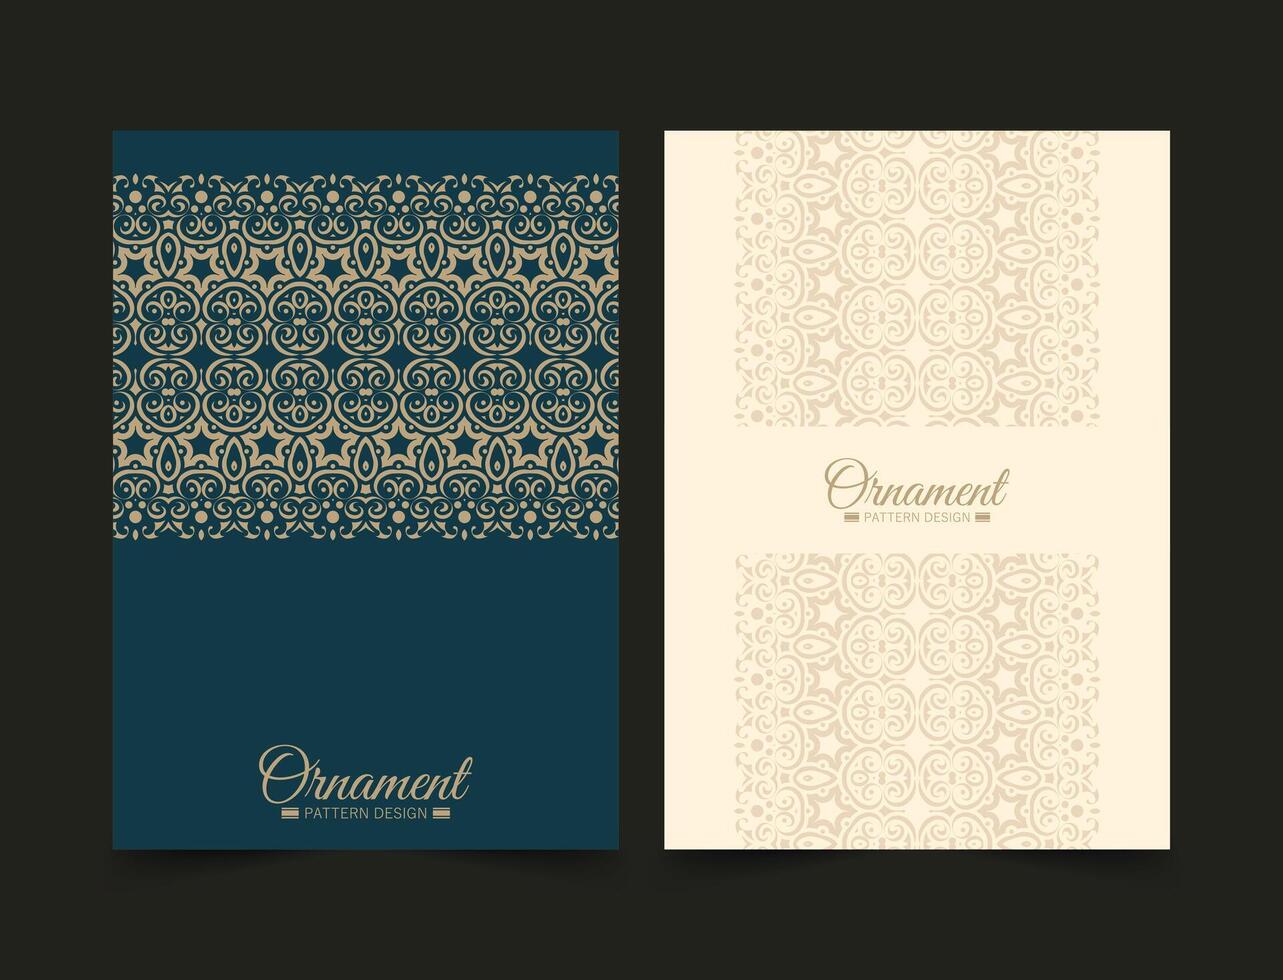 vintage abstract geometric pattern cover template vector